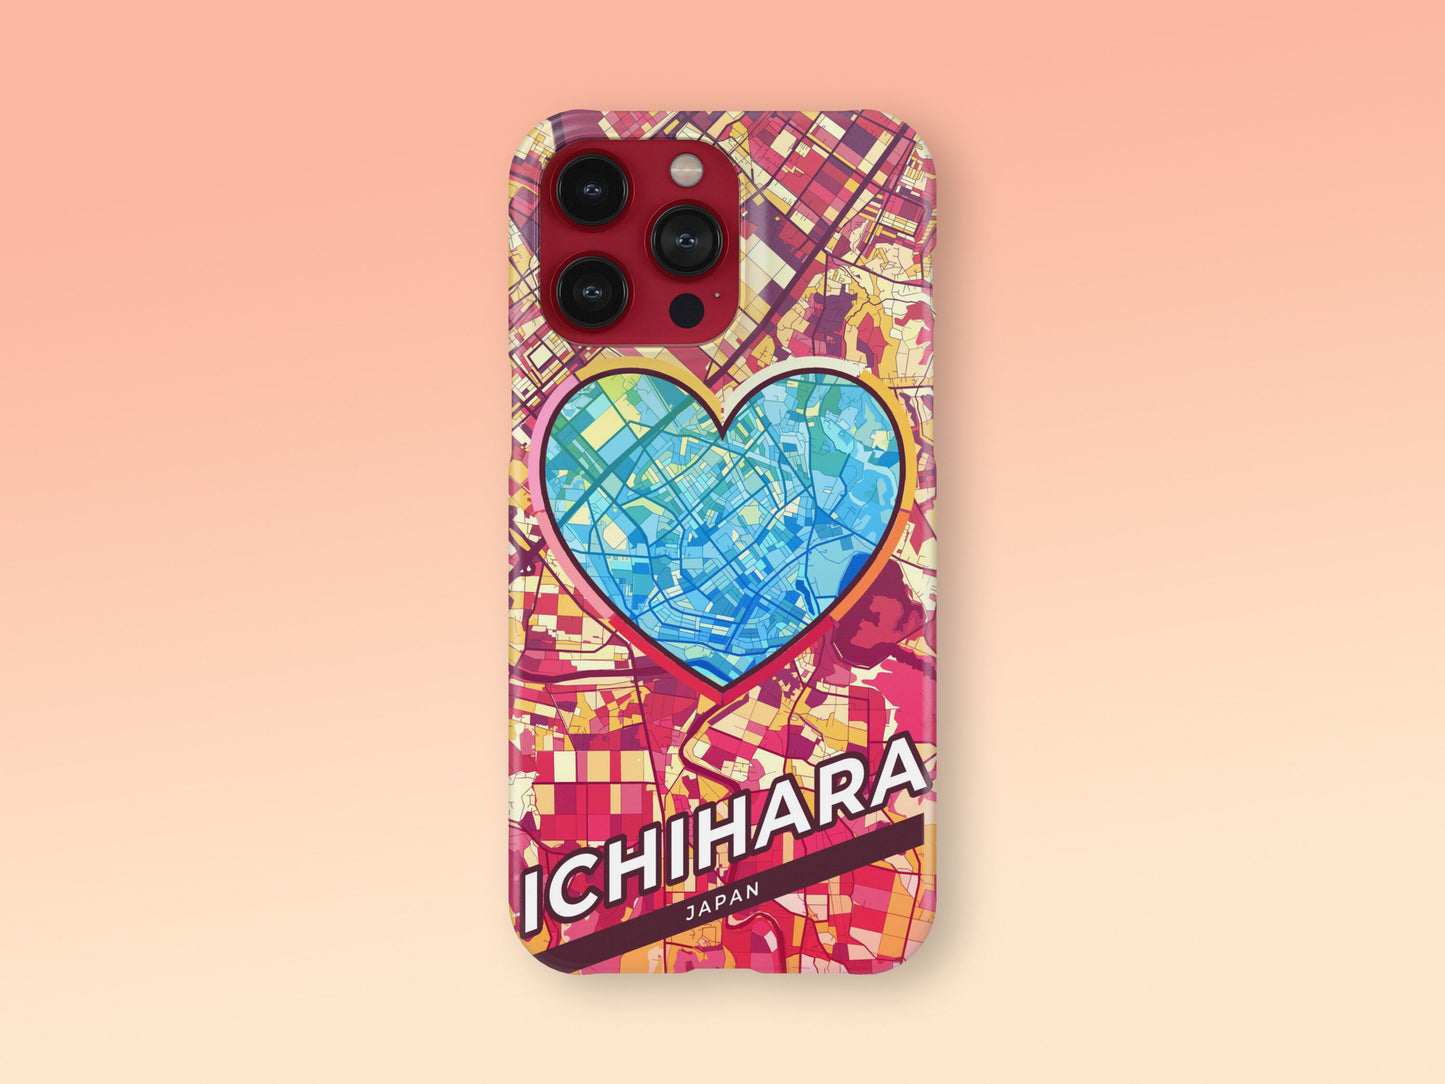 Ichihara Japan slim phone case with colorful icon. Birthday, wedding or housewarming gift. Couple match cases. 2